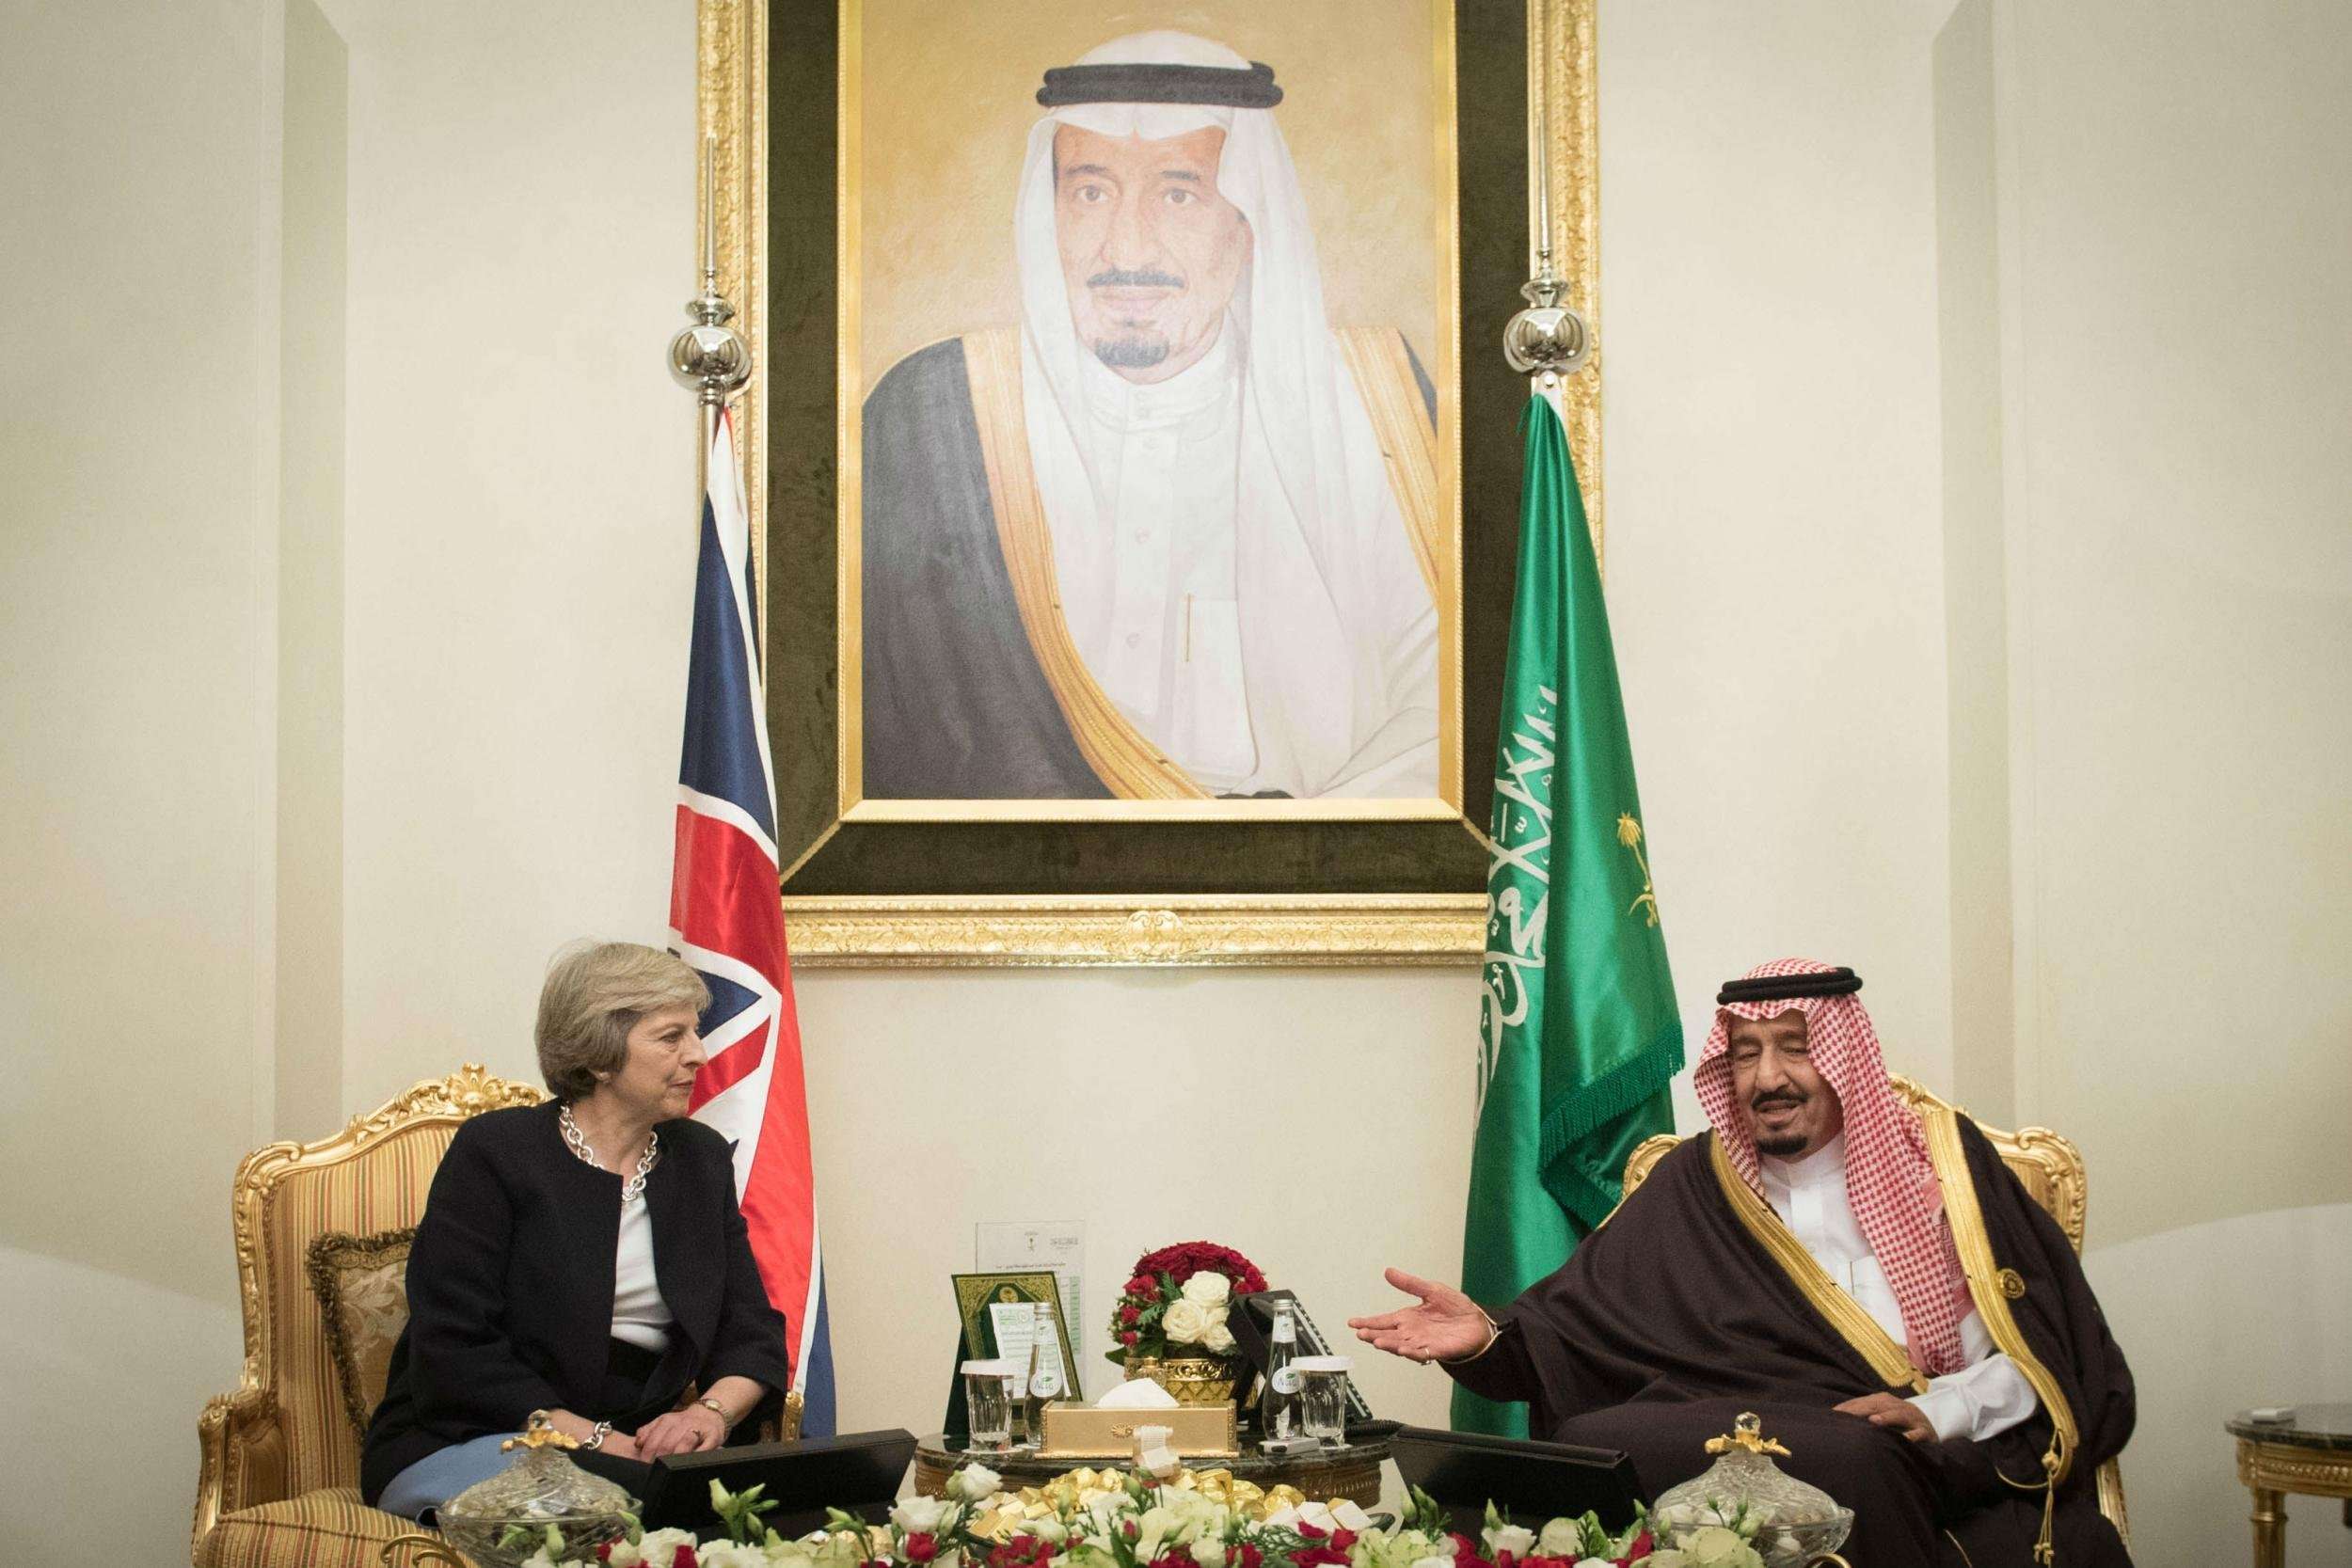 image for Survivors of 9/11 attack urge Theresa May to release Saudi Arabia terror report she suppressed